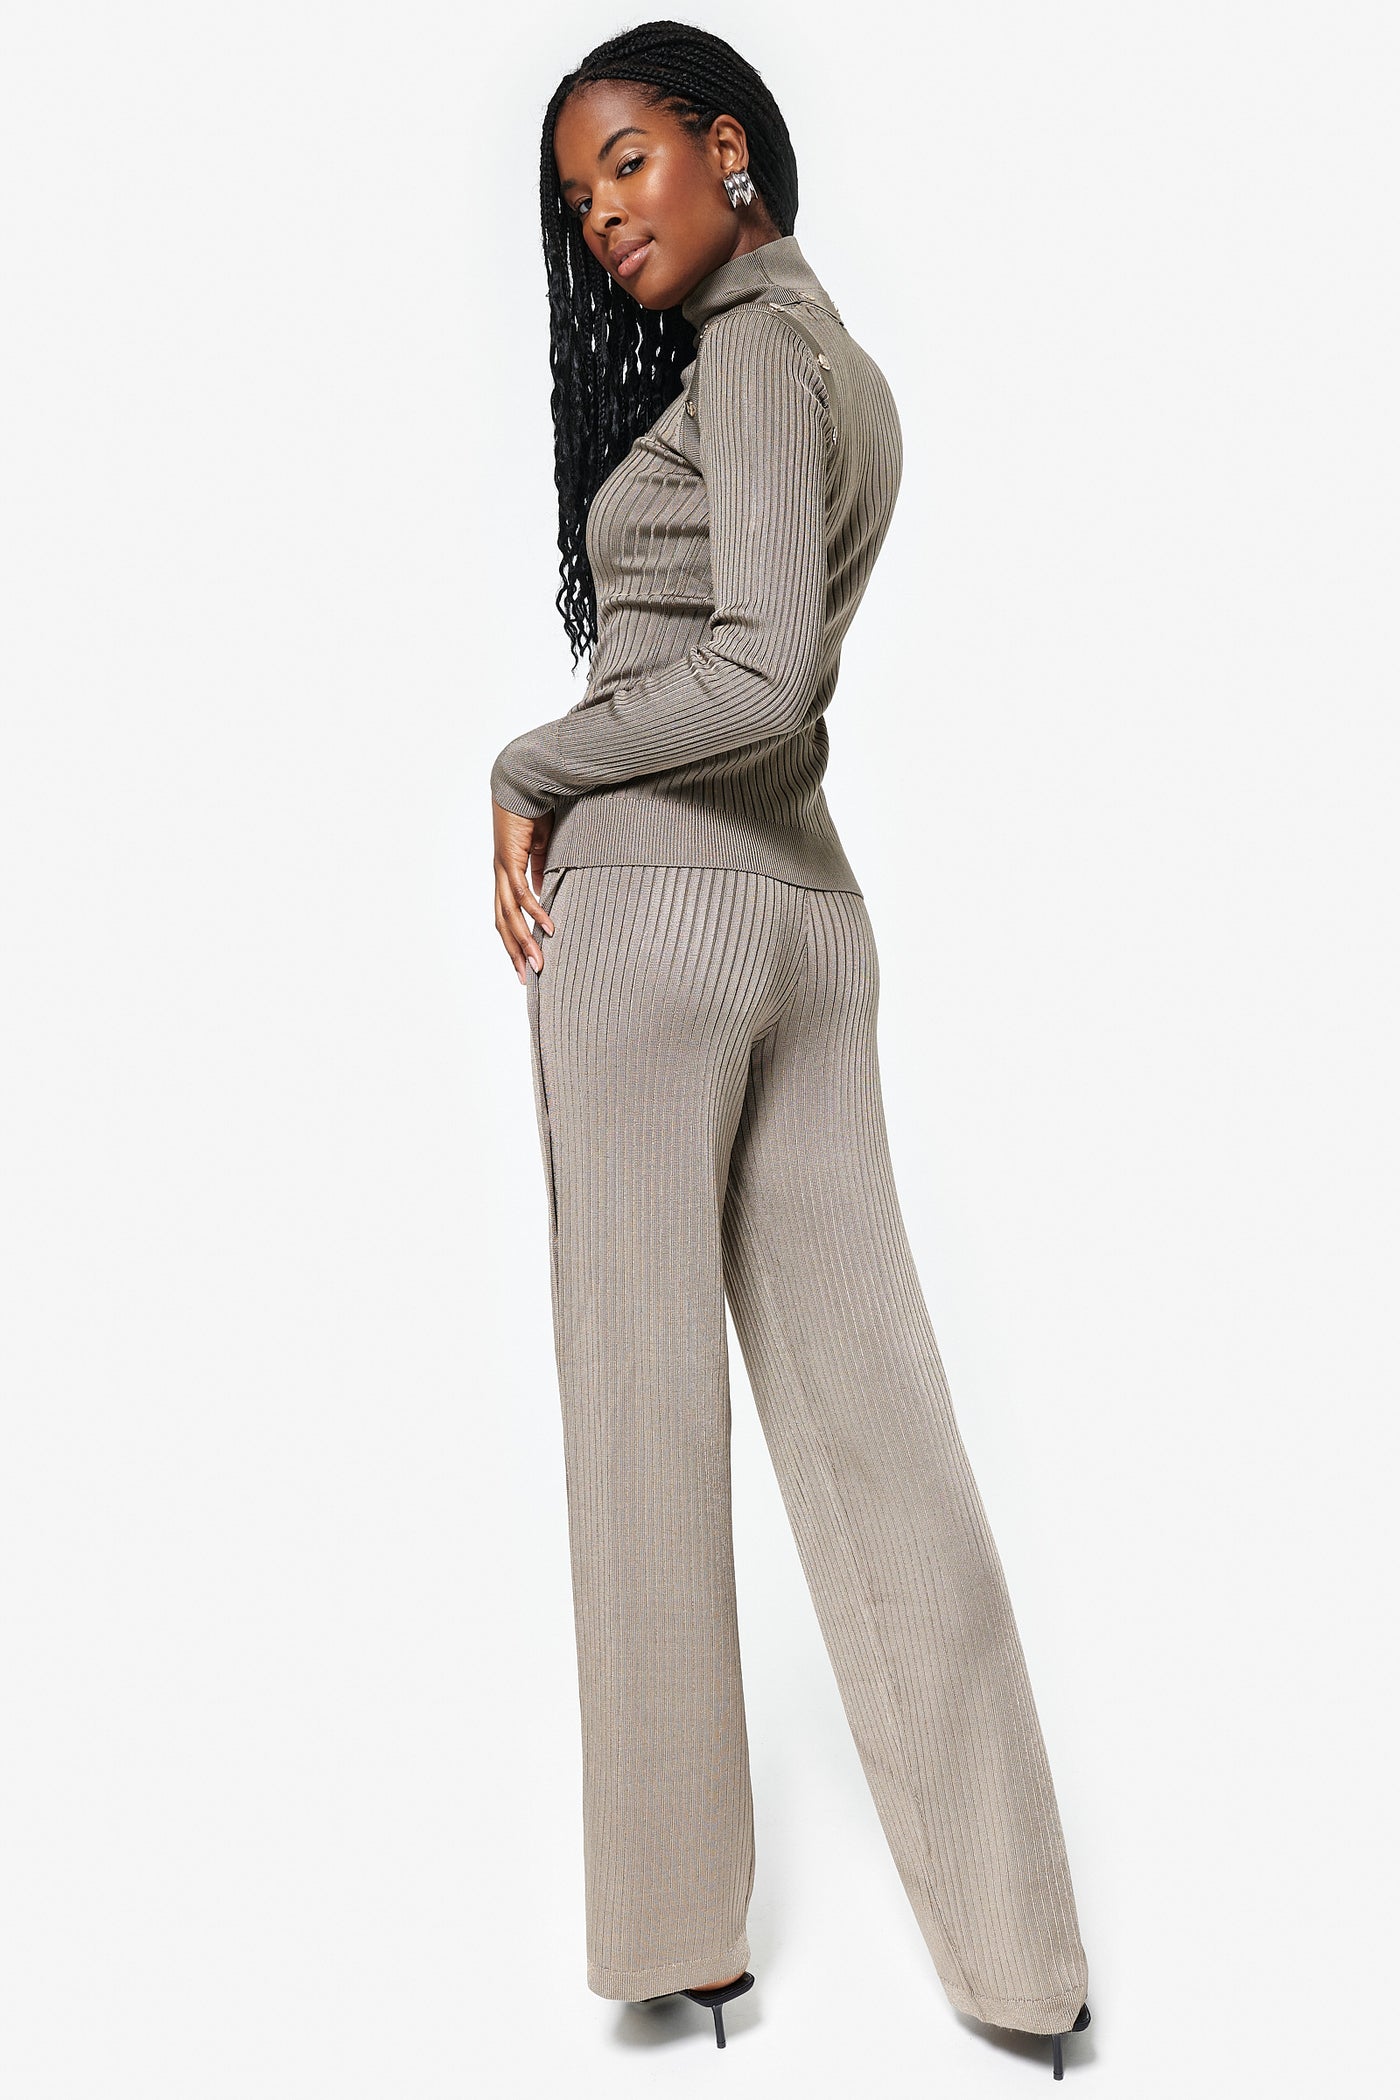 Exclusive Hathaway Track Pant